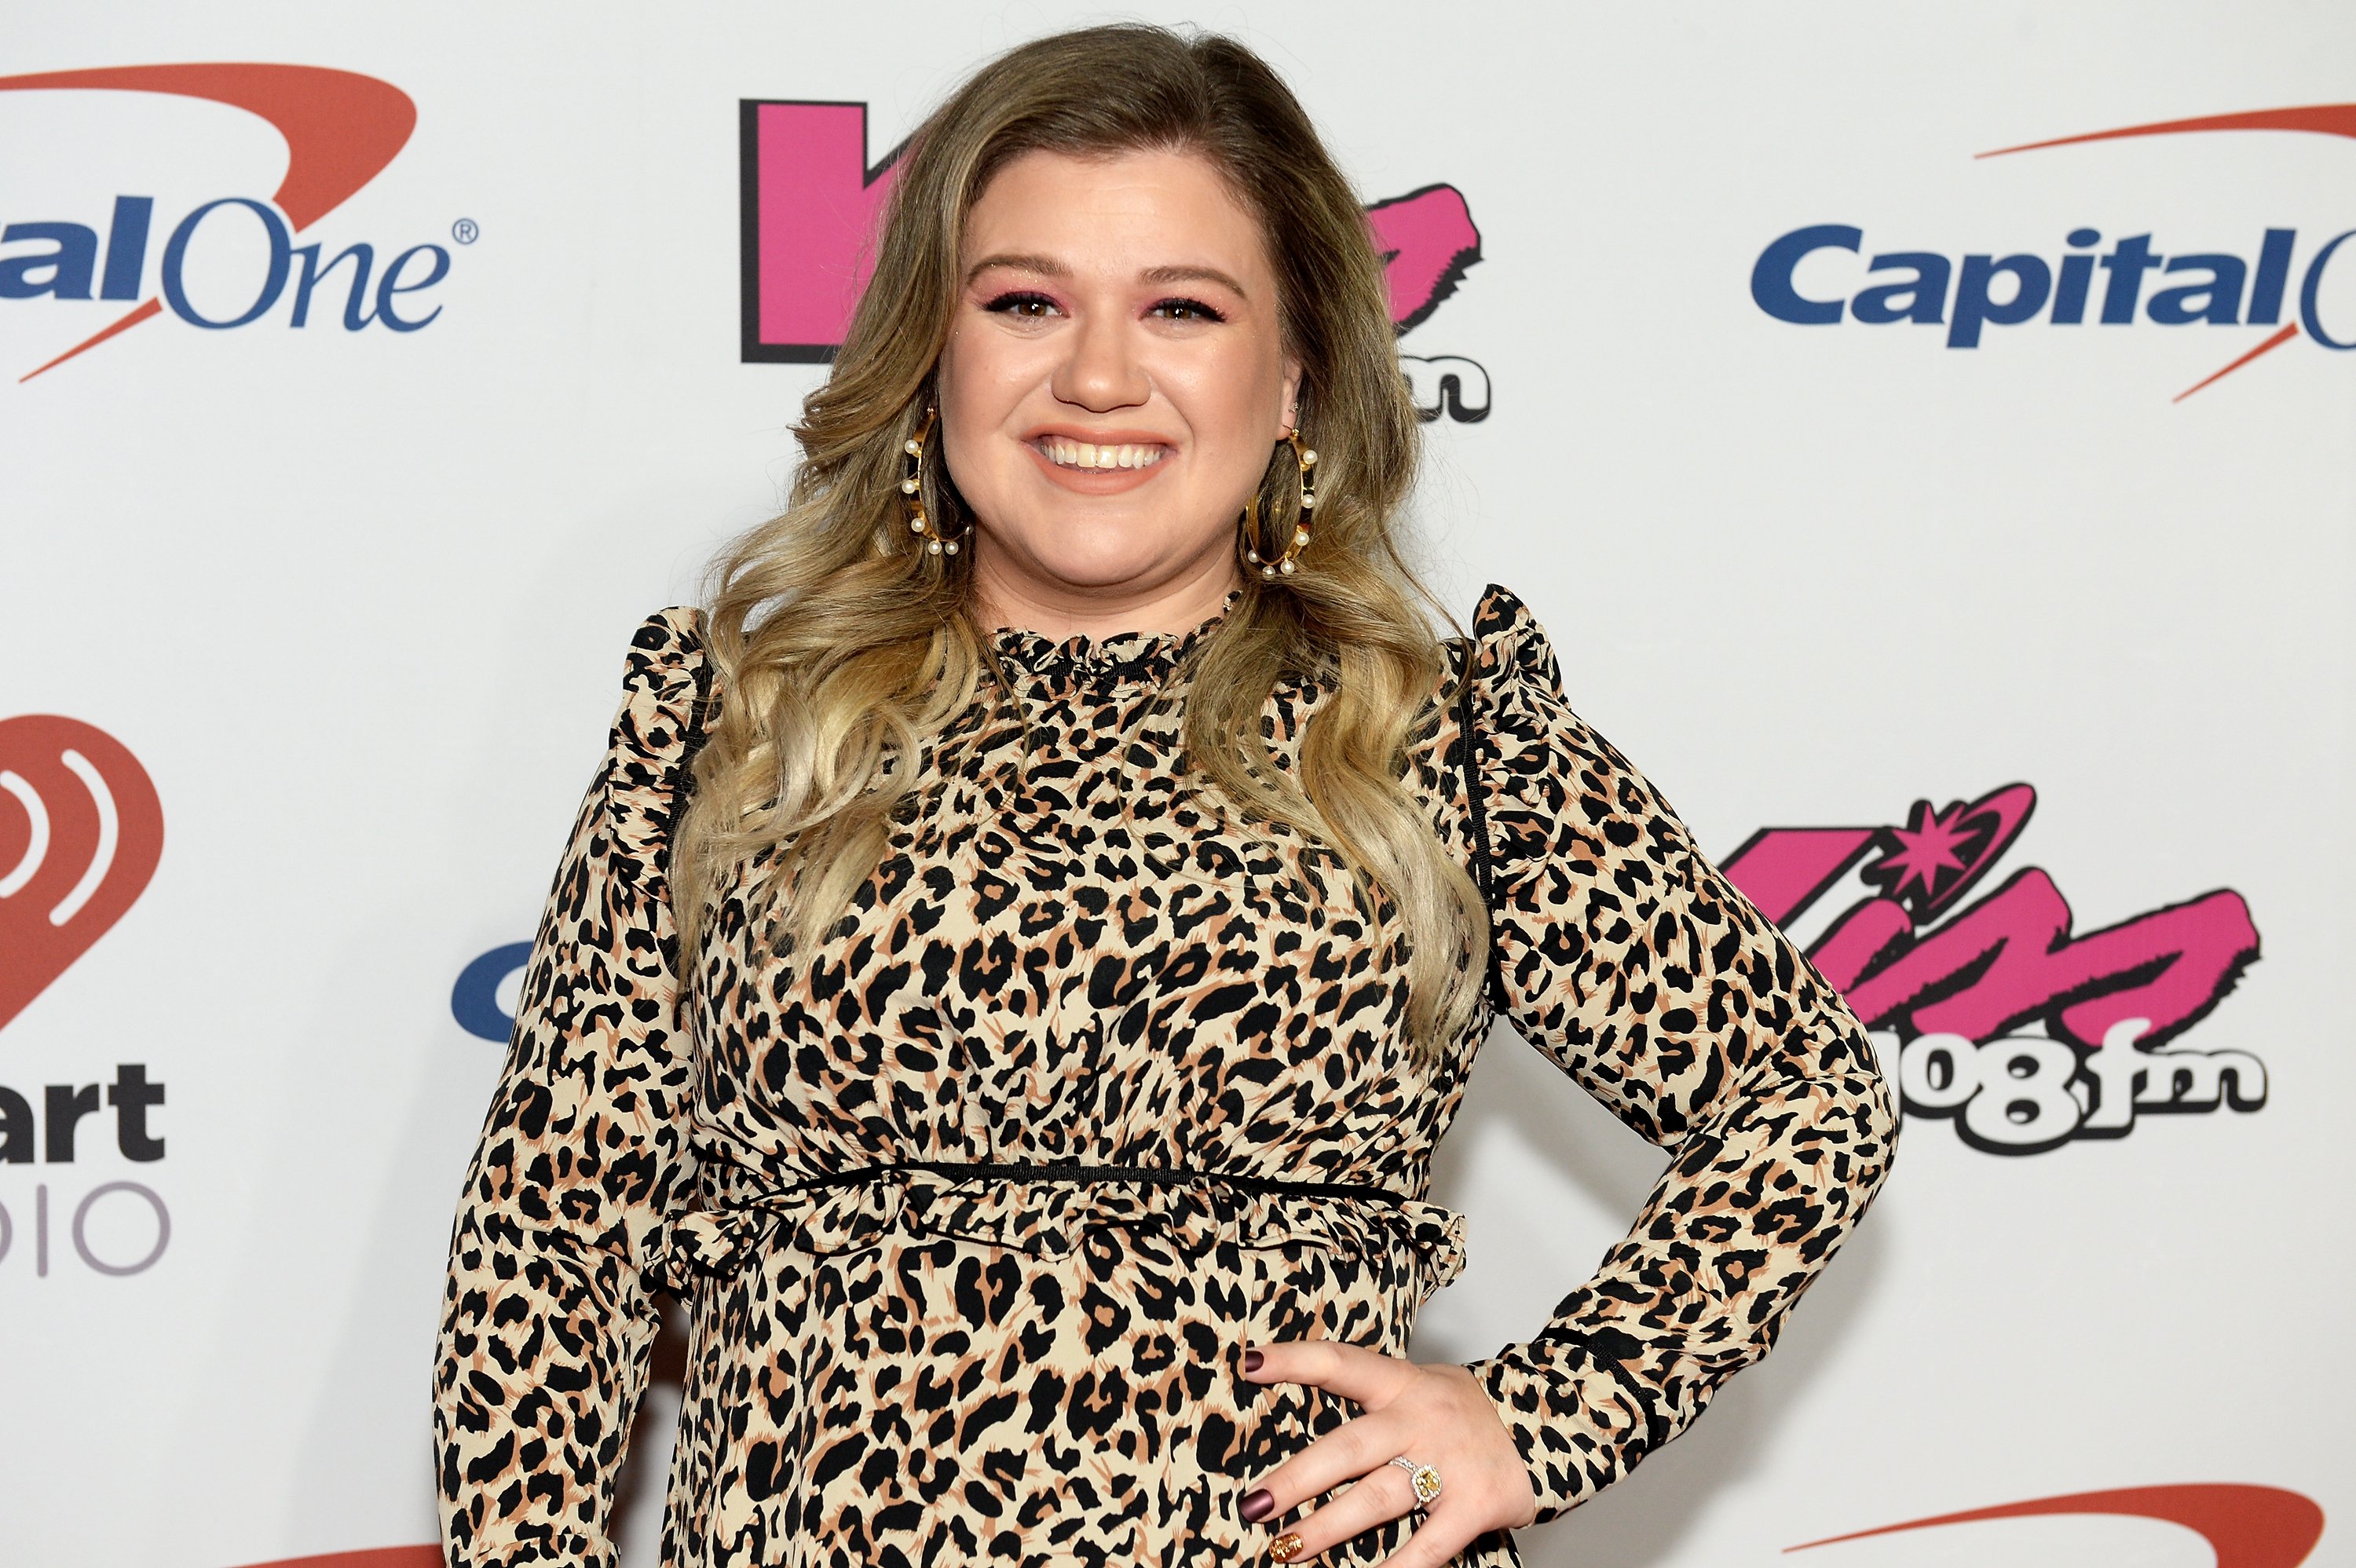 Kelly Clarkson attends KISS 108's Jingle Ball 2017 presented by Capital One at TD Garden on December 10, 2017 in Boston, Mass | Photo: Getty Images